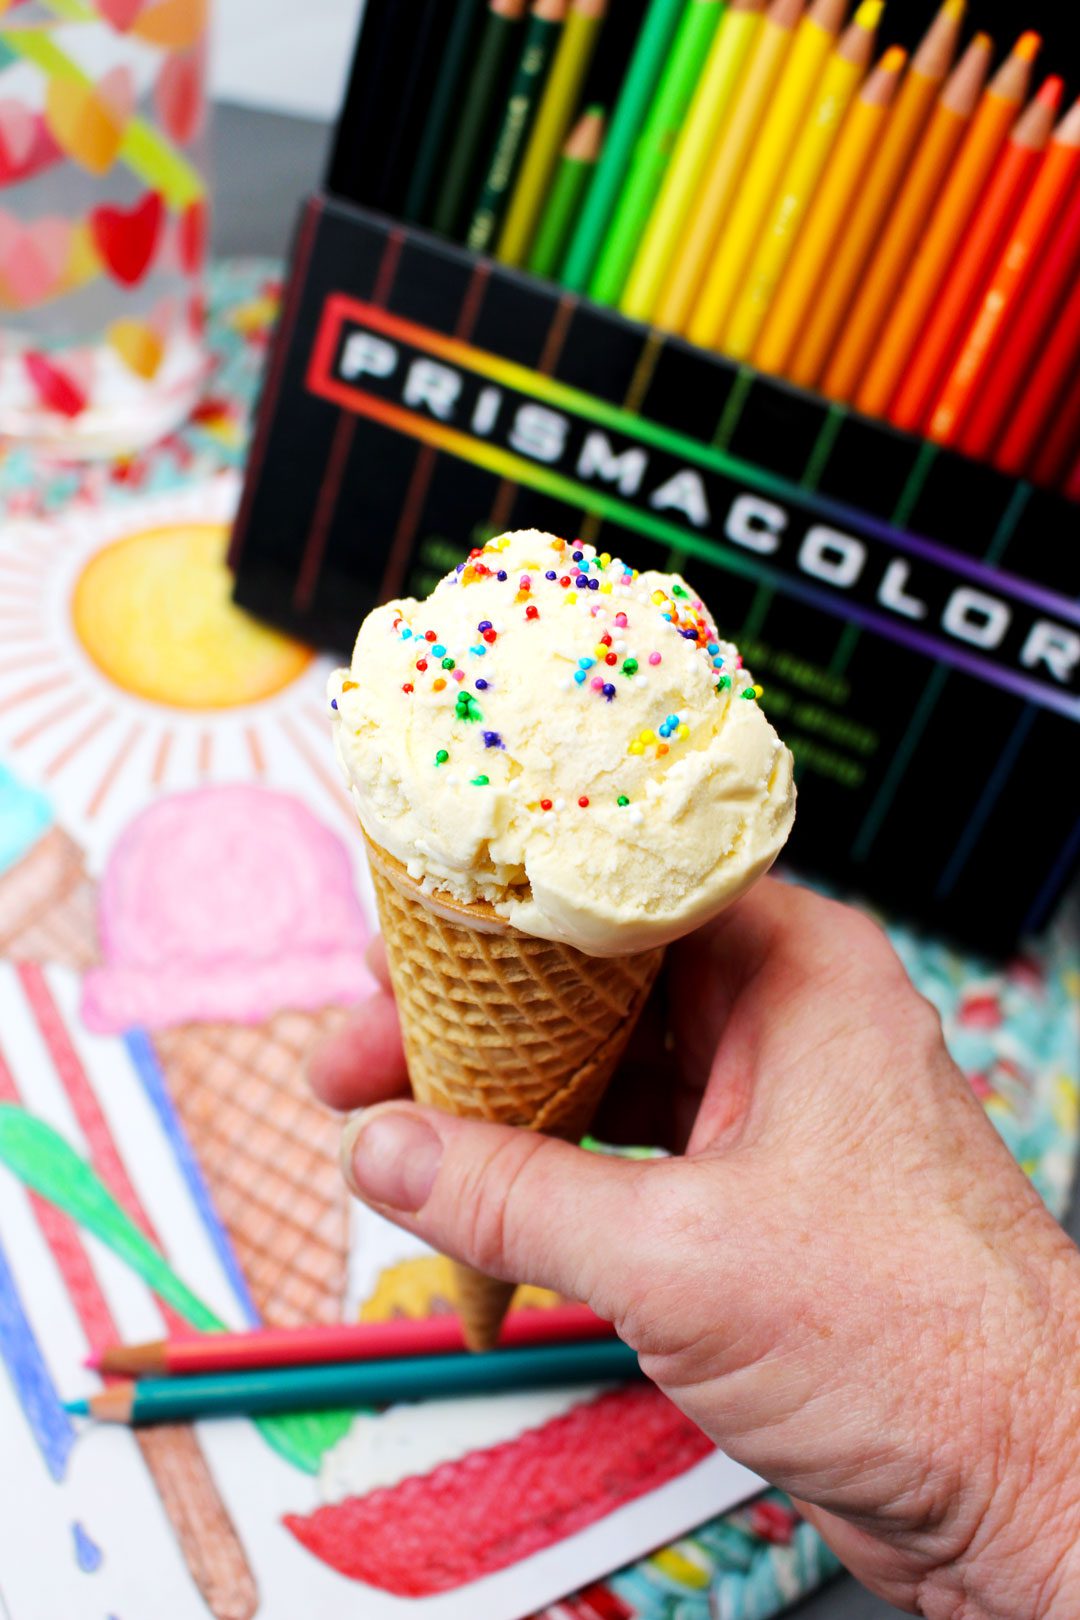 A hand holding an ice cream cone with a scoop of vanilla ice cream with sprinkles, in front of colored pencils and a coloring page.